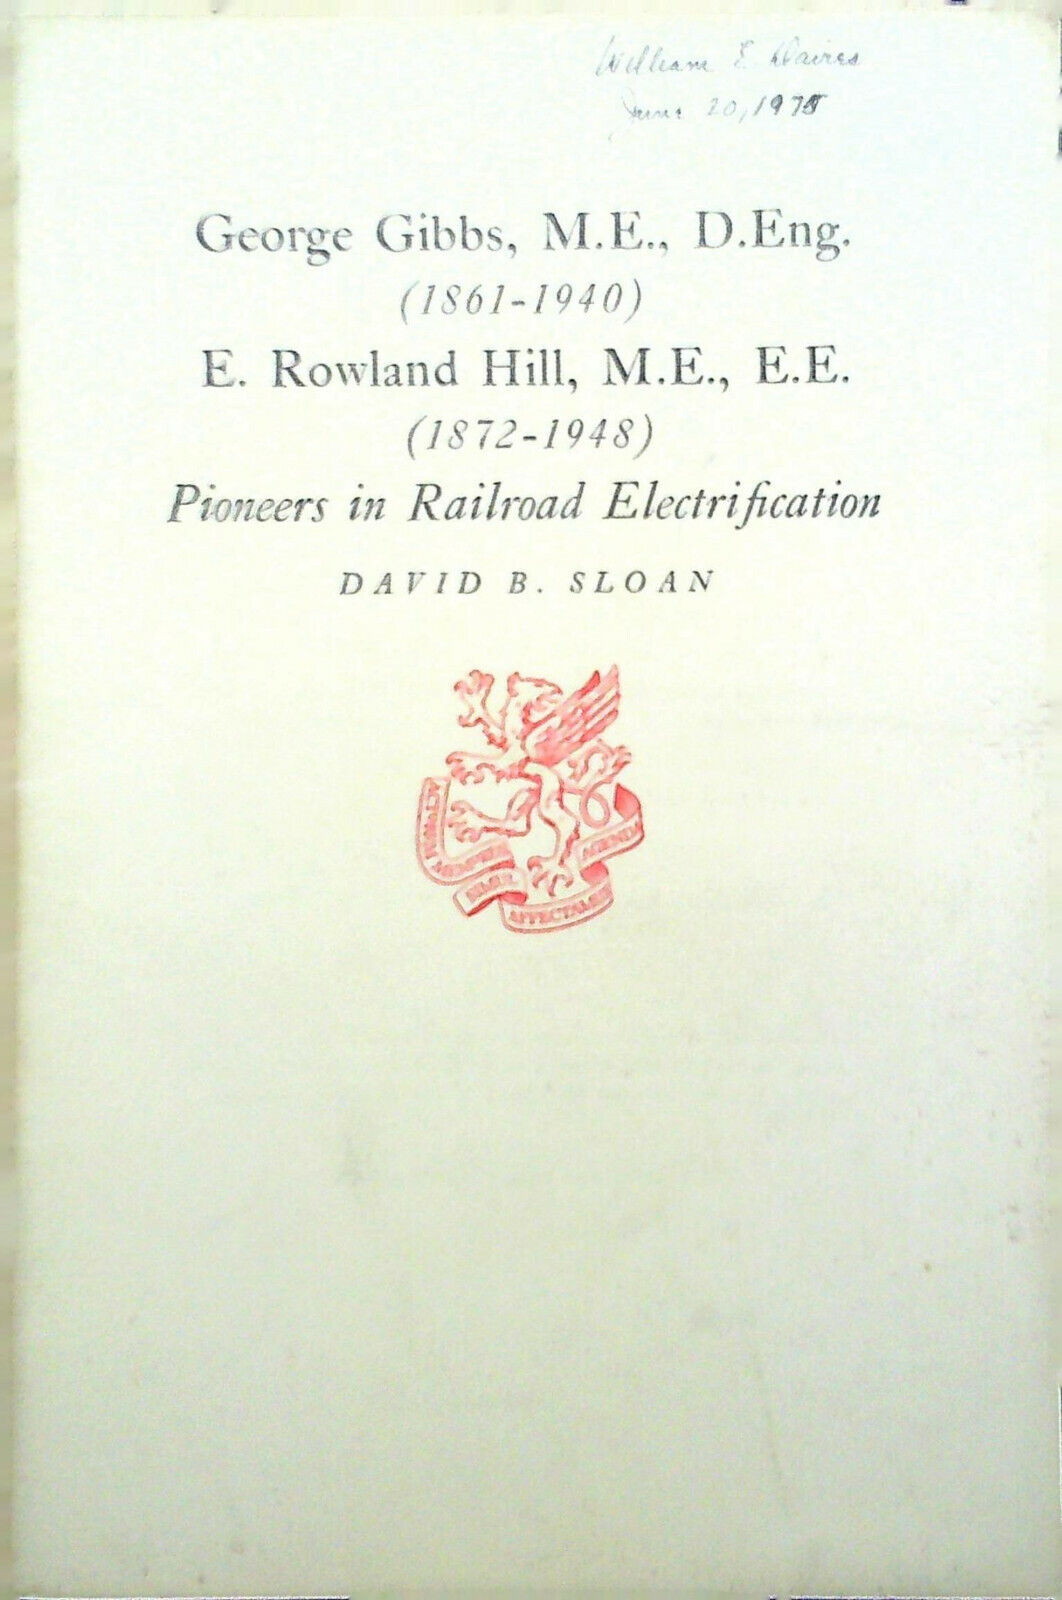  George Gibbs and E. Rowland Hill, Pioneers in Railroad Electrification 